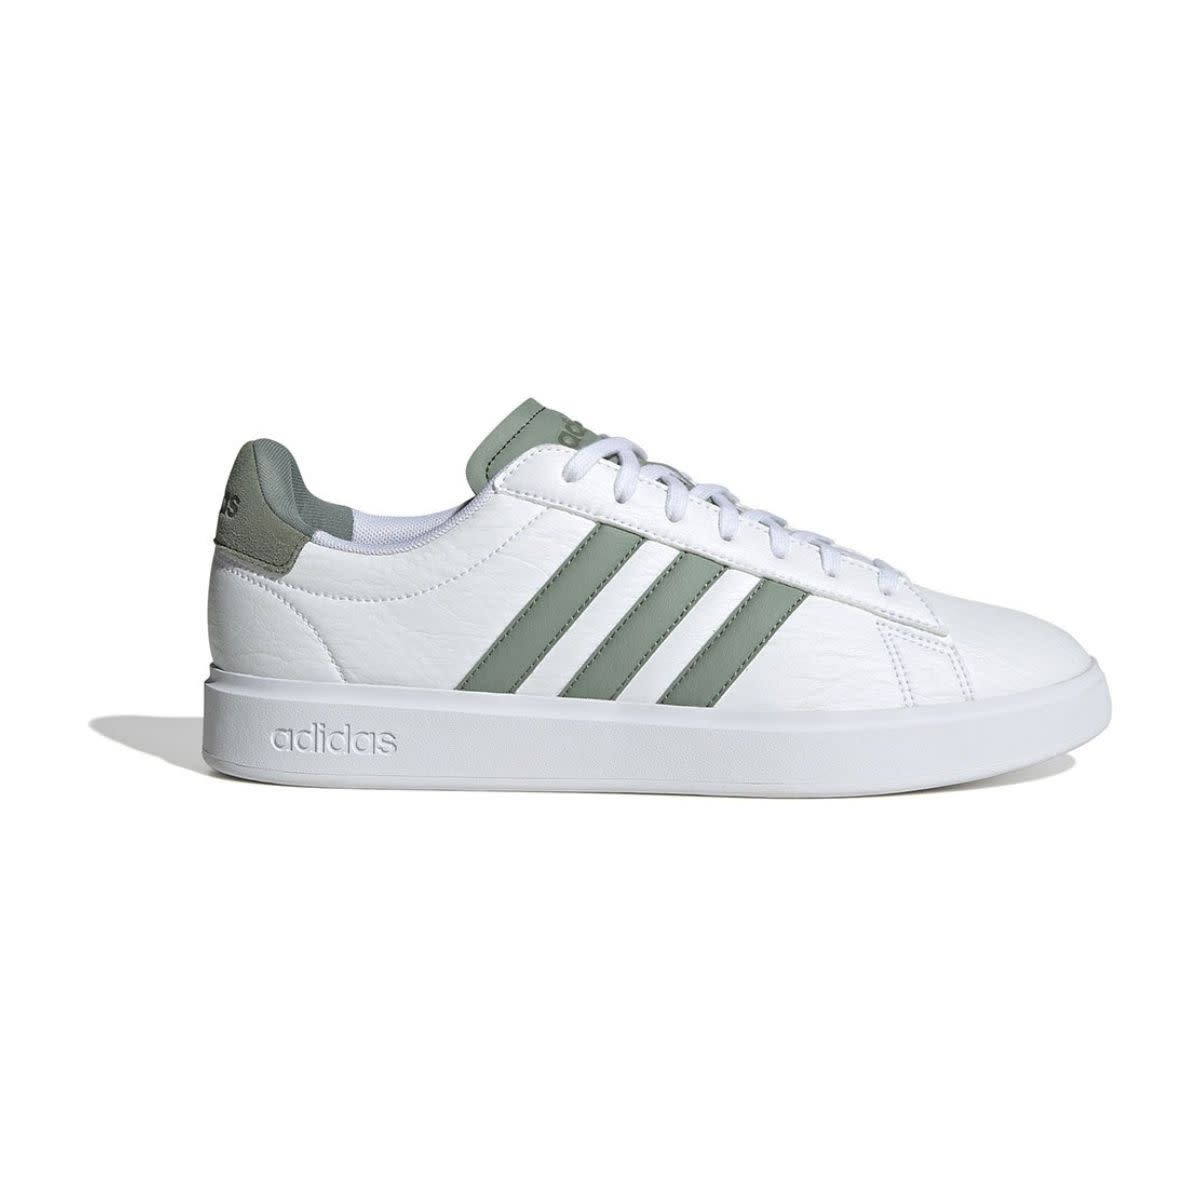 Adidas Grand Court 2.0 (Cloud White/Silver Green/Olive Strata) ID4471